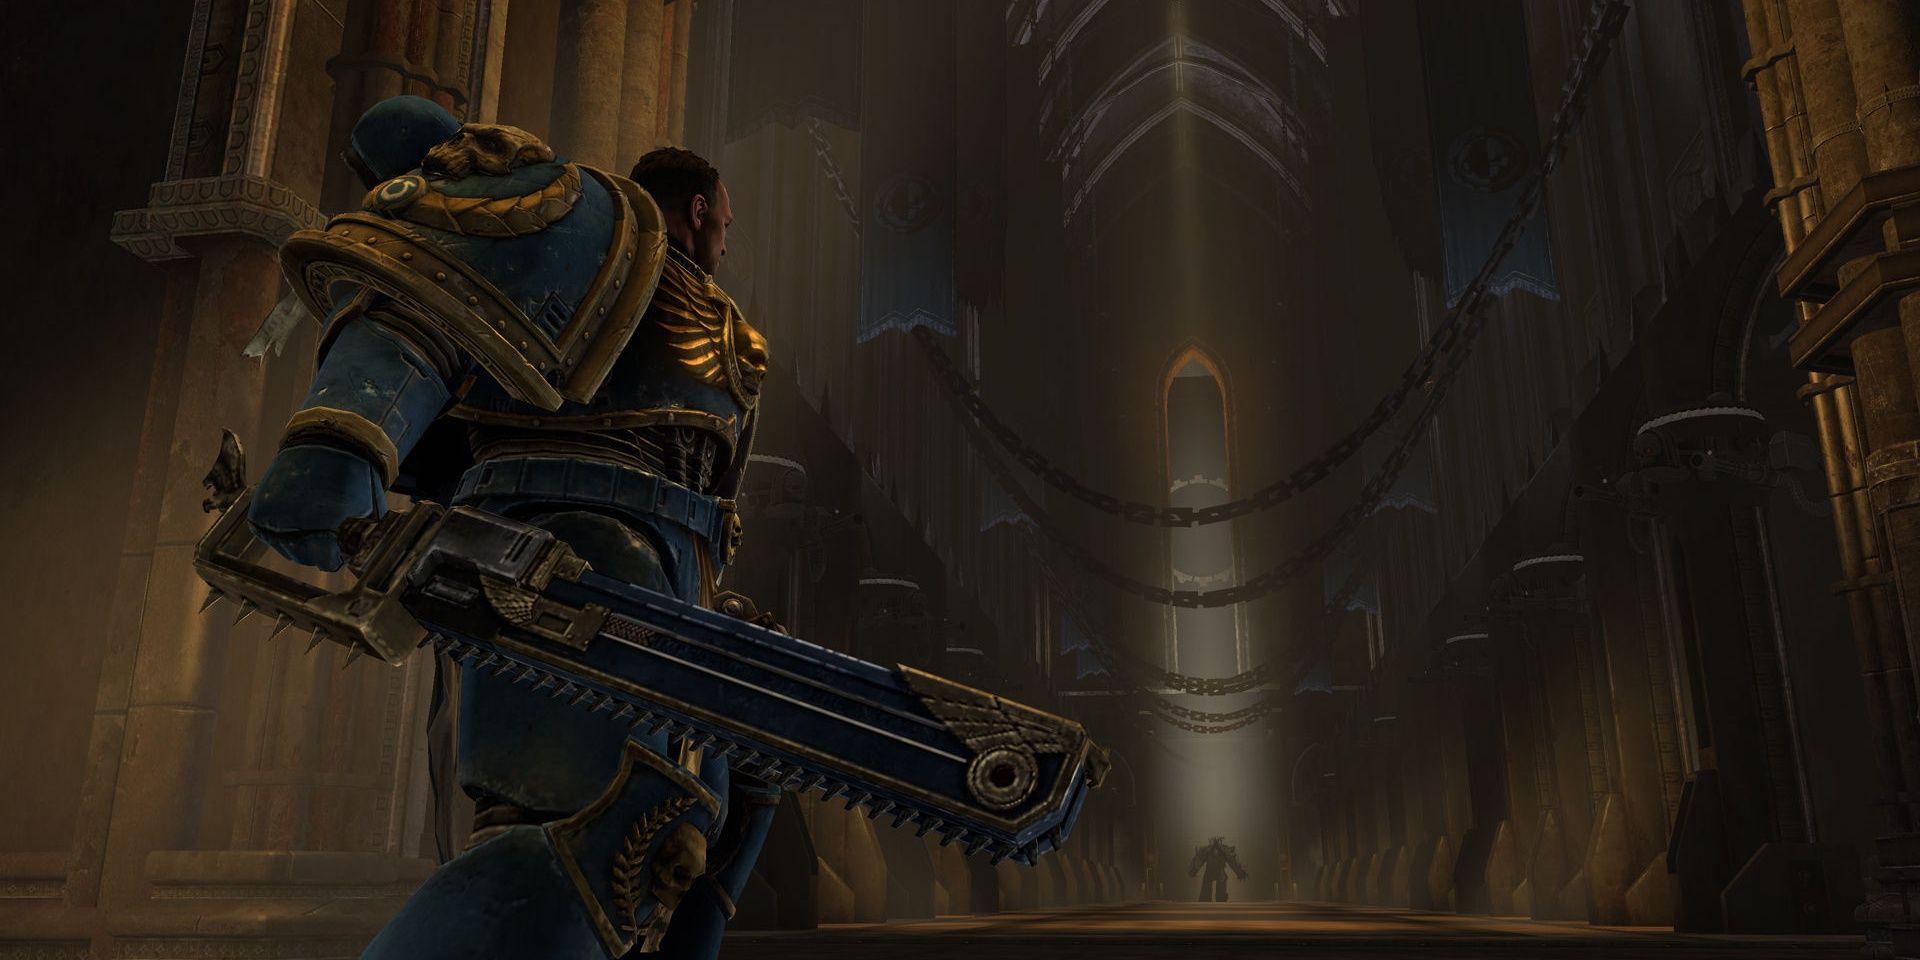 Space Marine Captain squaring off against a chaos marine in a cathedral